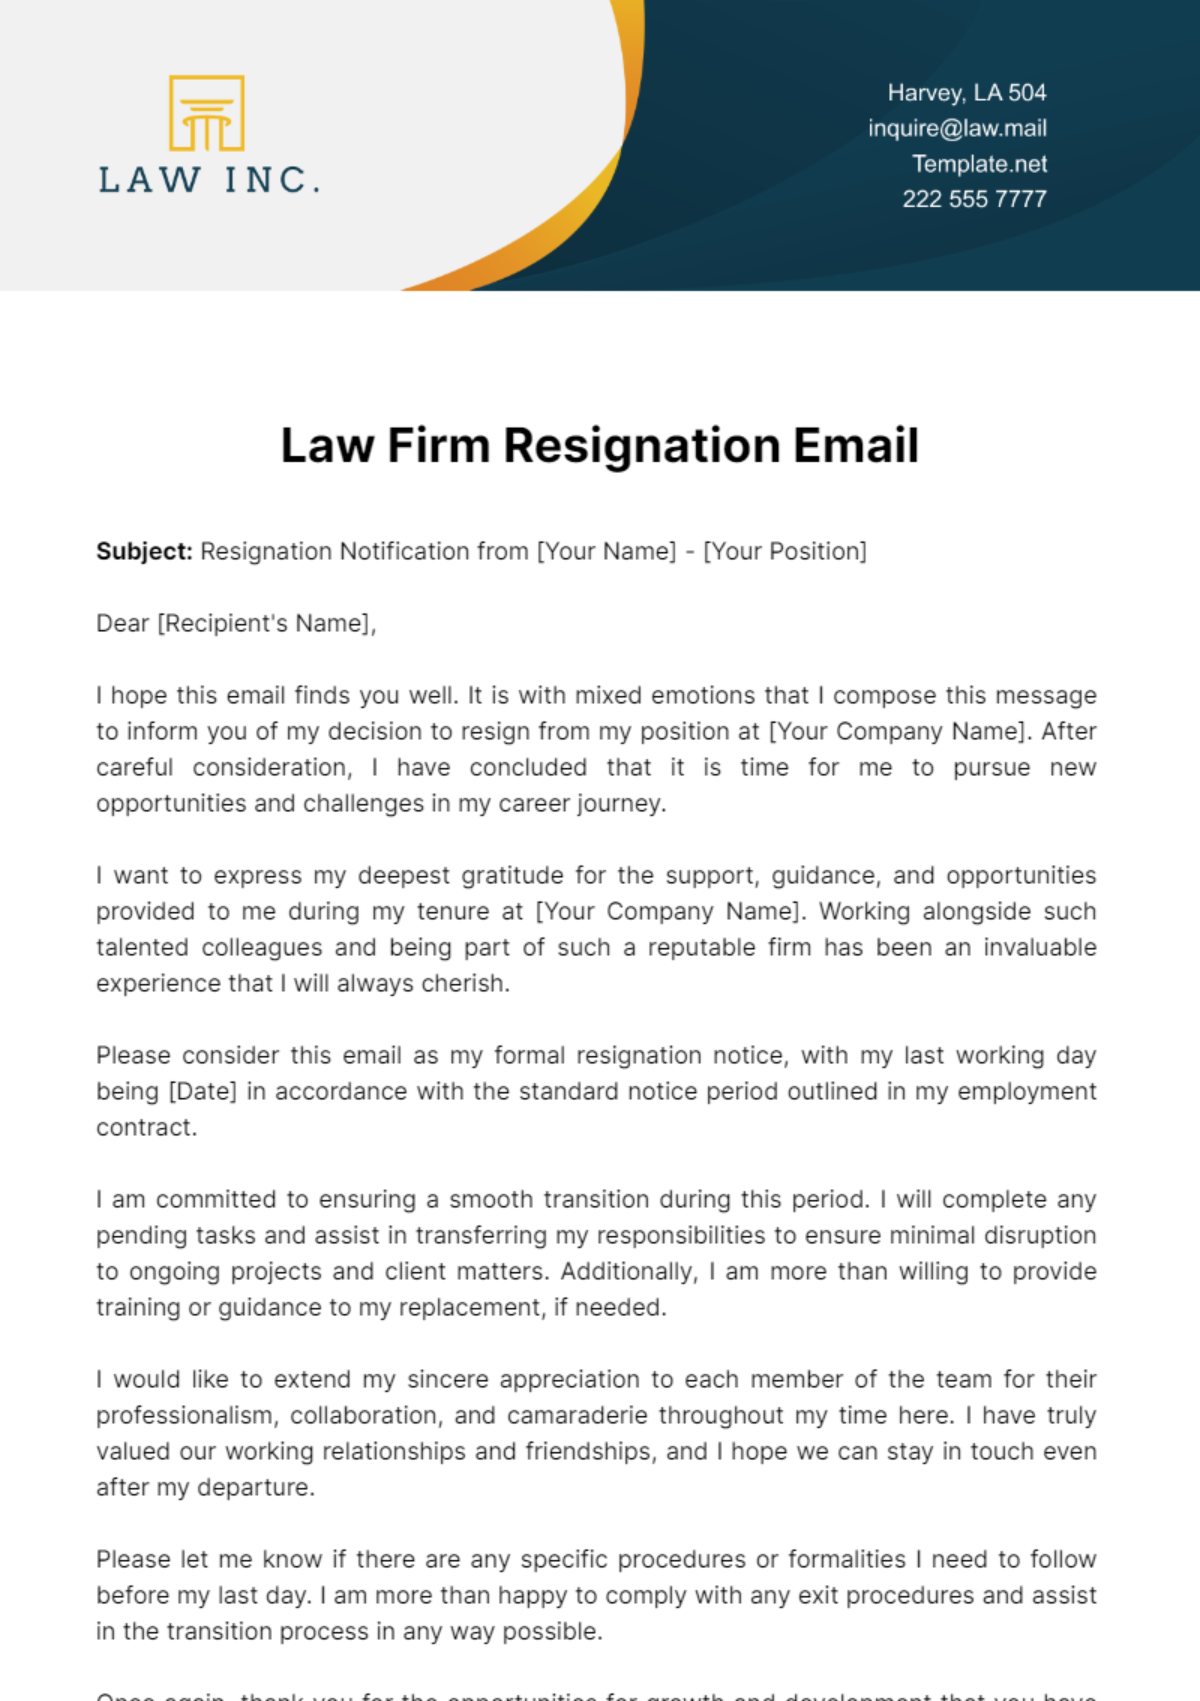 Law Firm Resignation Email Template